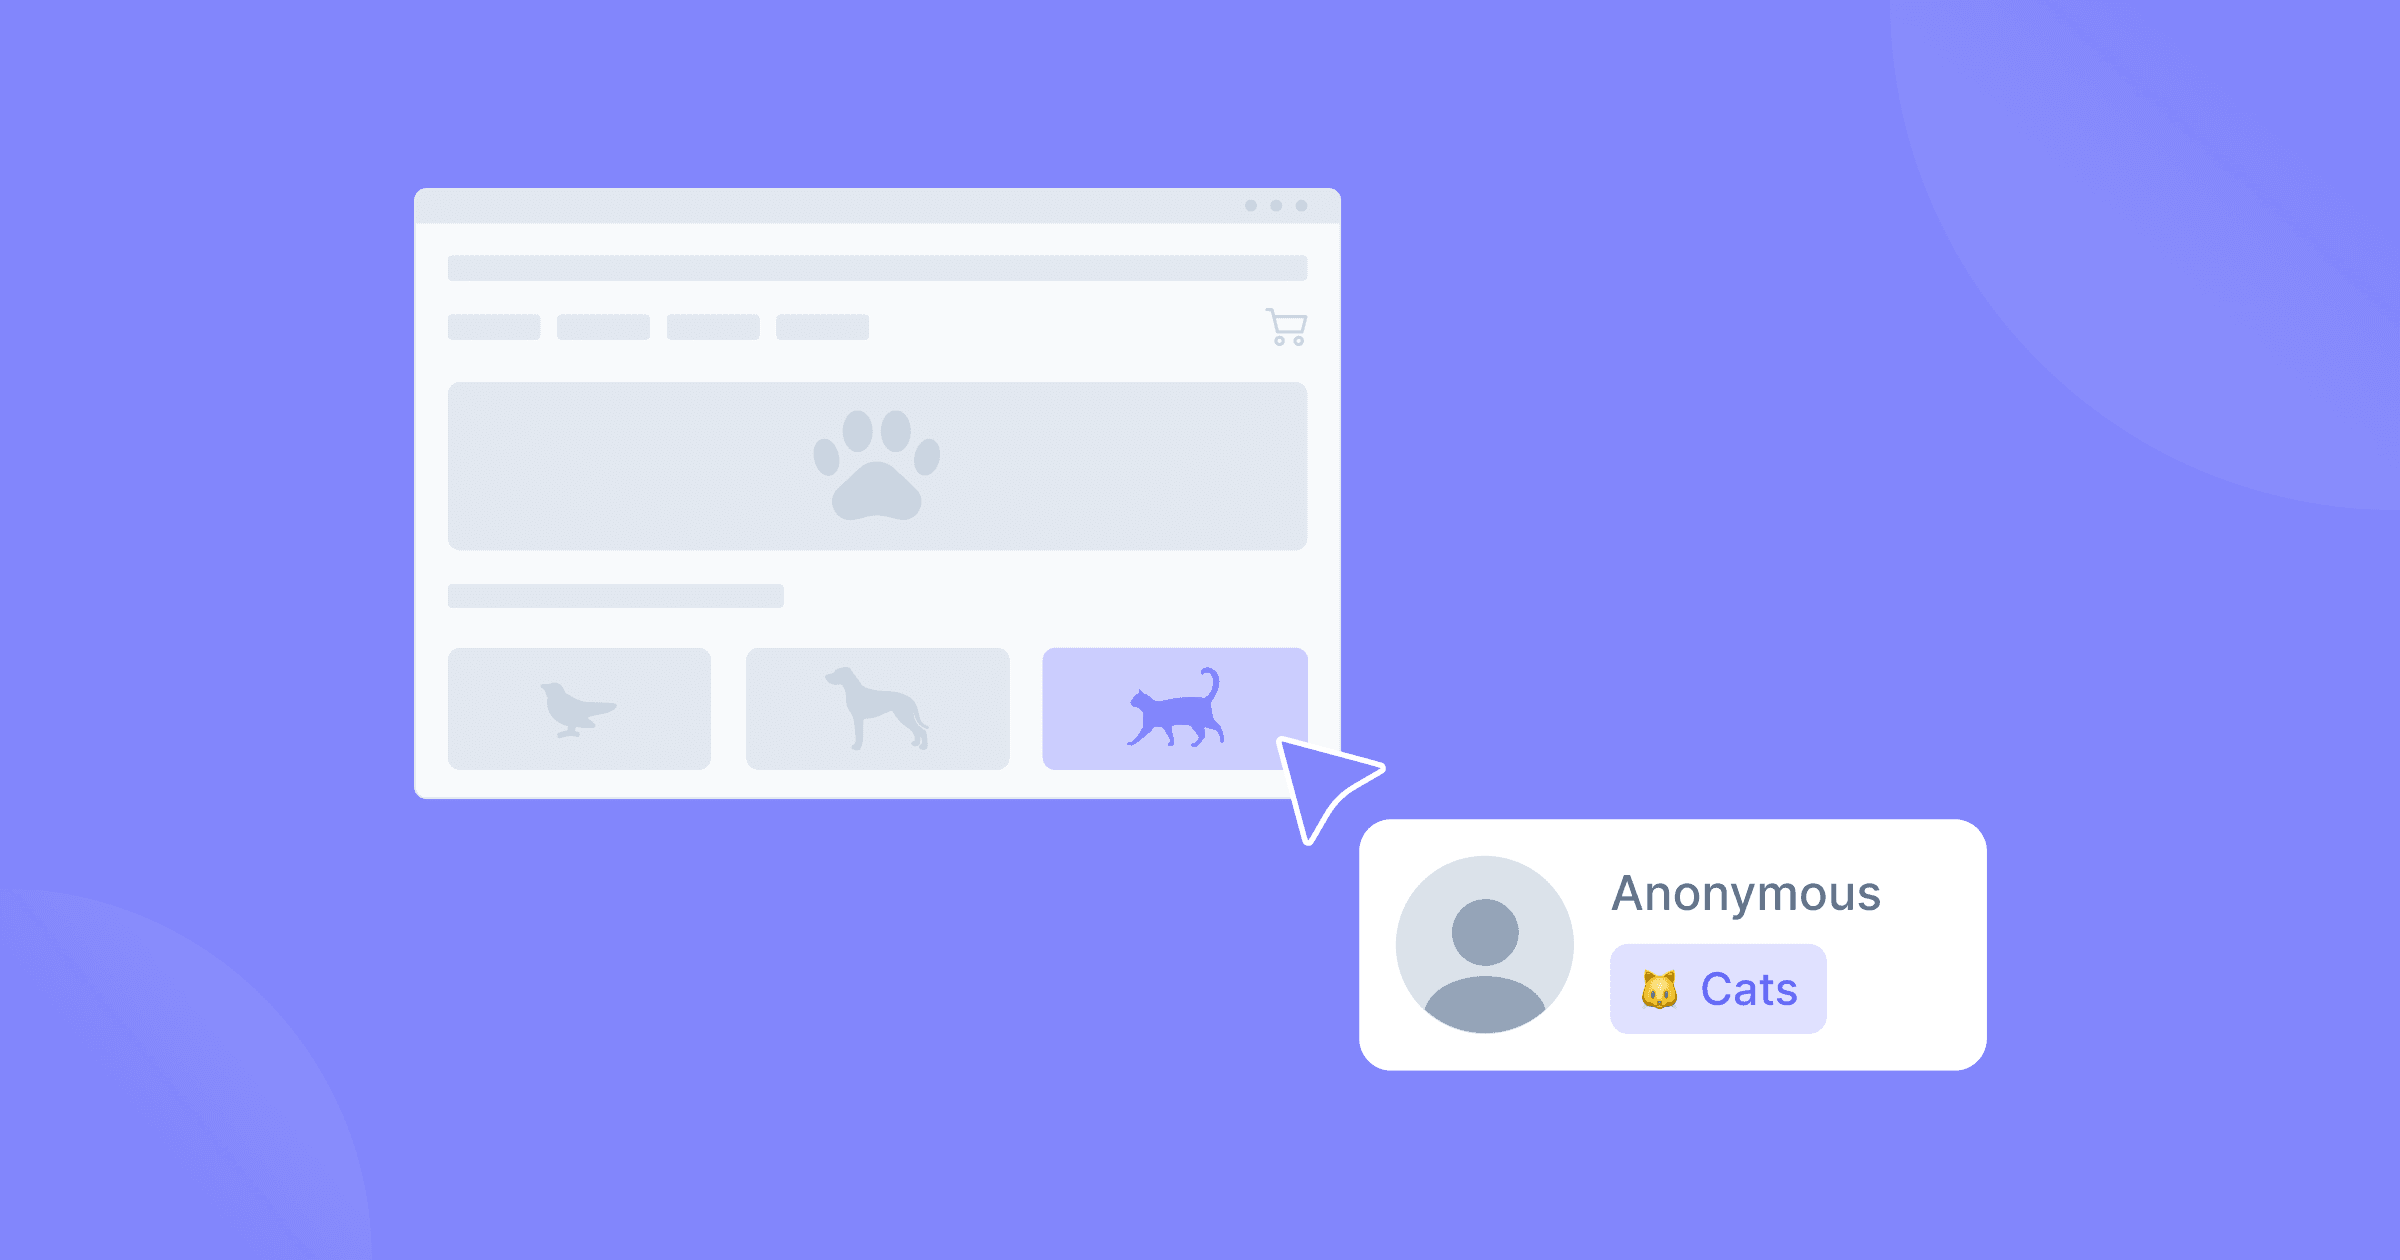 Pet shop ecommerce wireframe with cards corresponding to different pets. An anonymous user who is interested in cats is represented by a cursor, an avatar and a cat emoji.